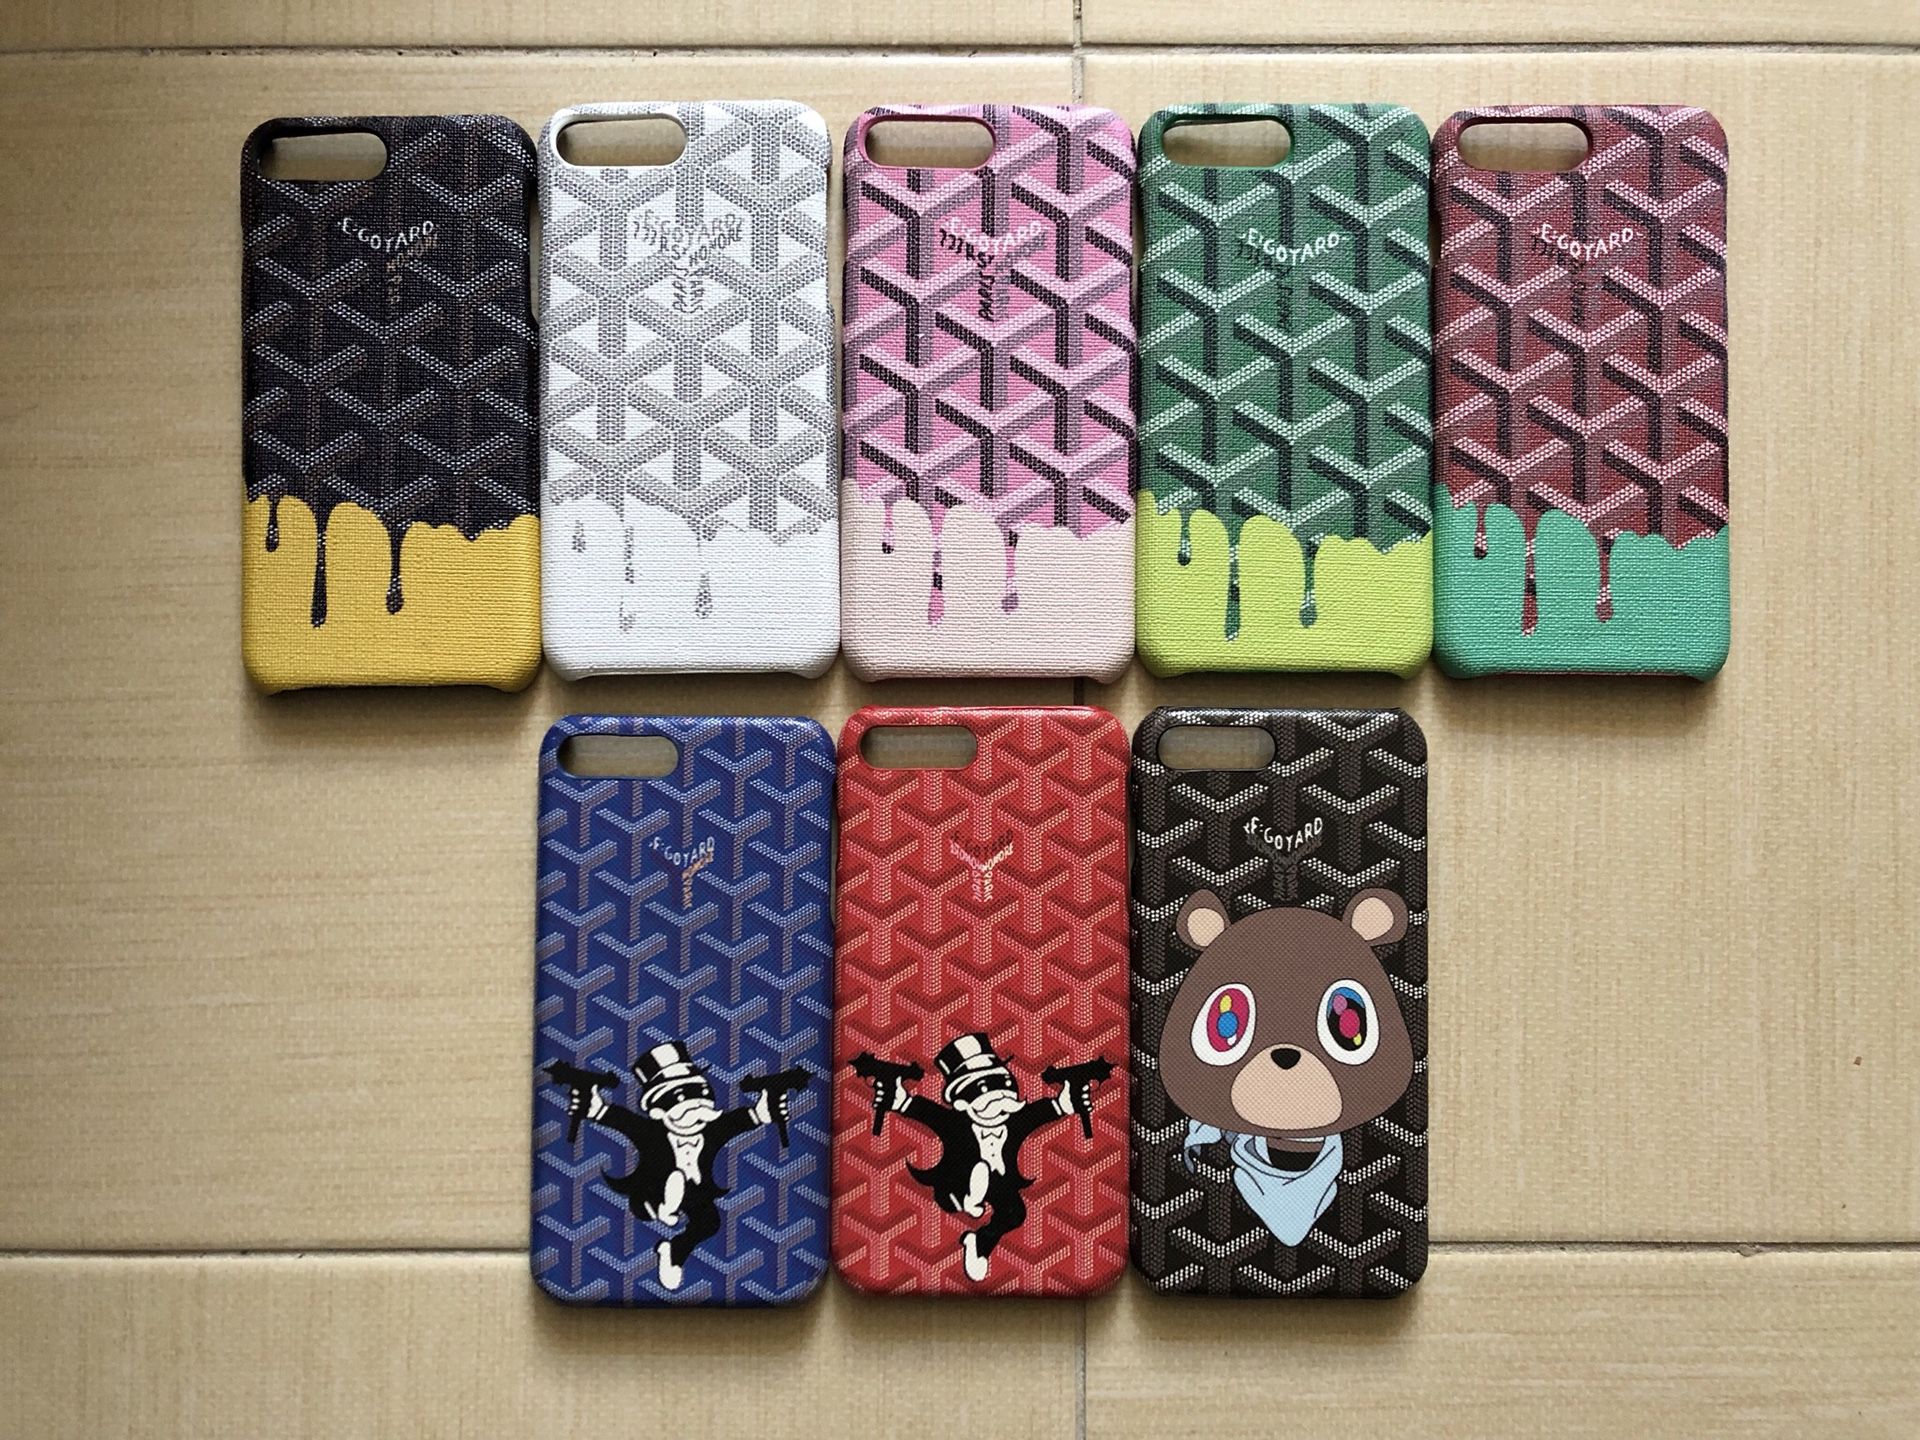 Goyard iphone cases iphone x, pluses, and regular size